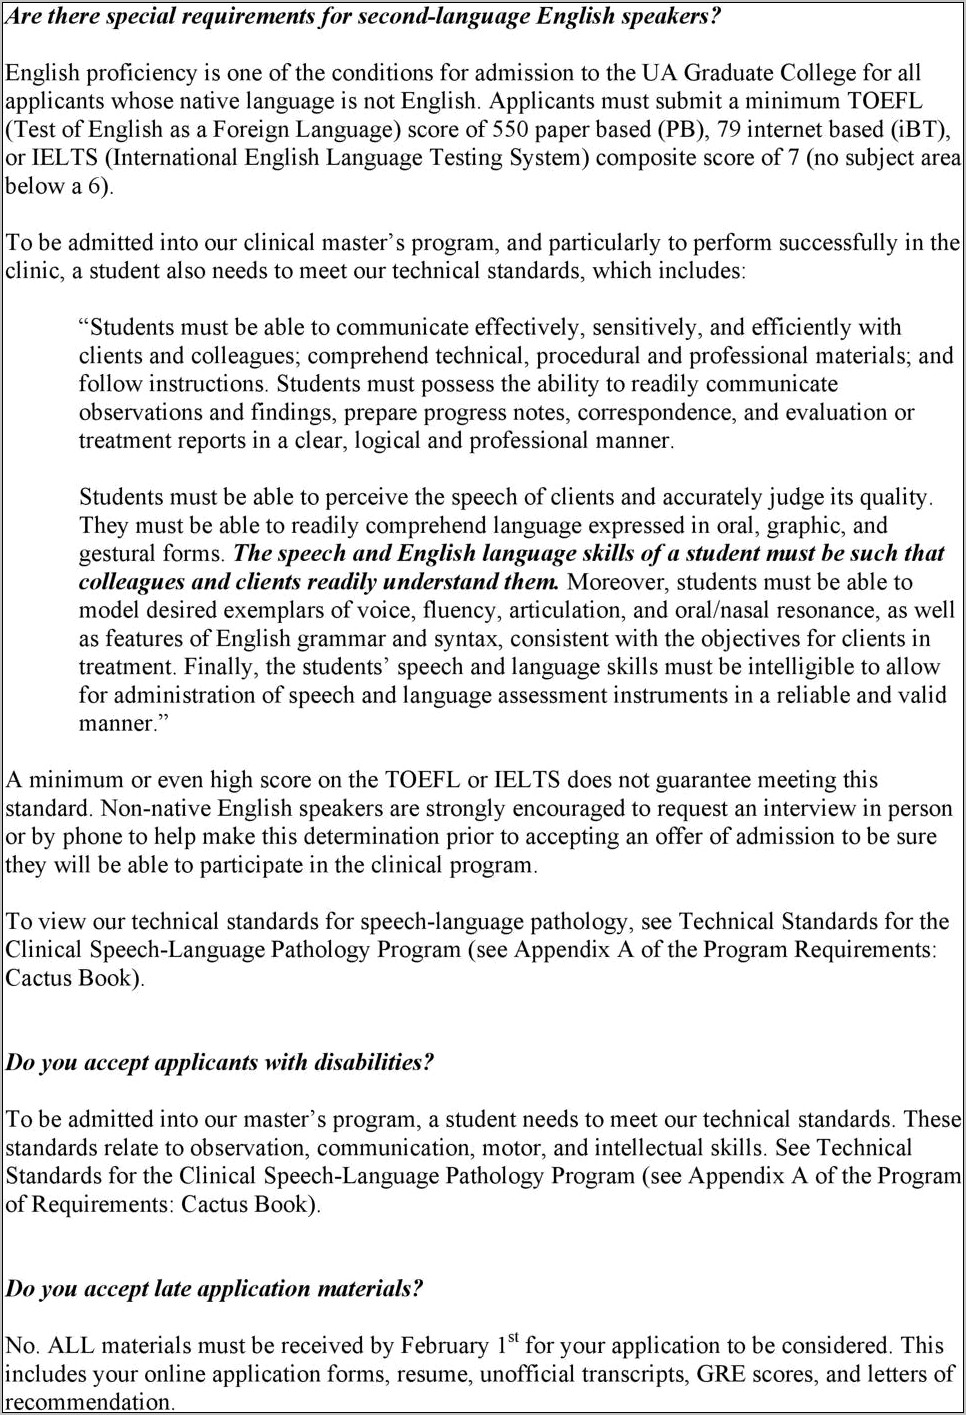 how to write a personal statement for speech pathology graduate school